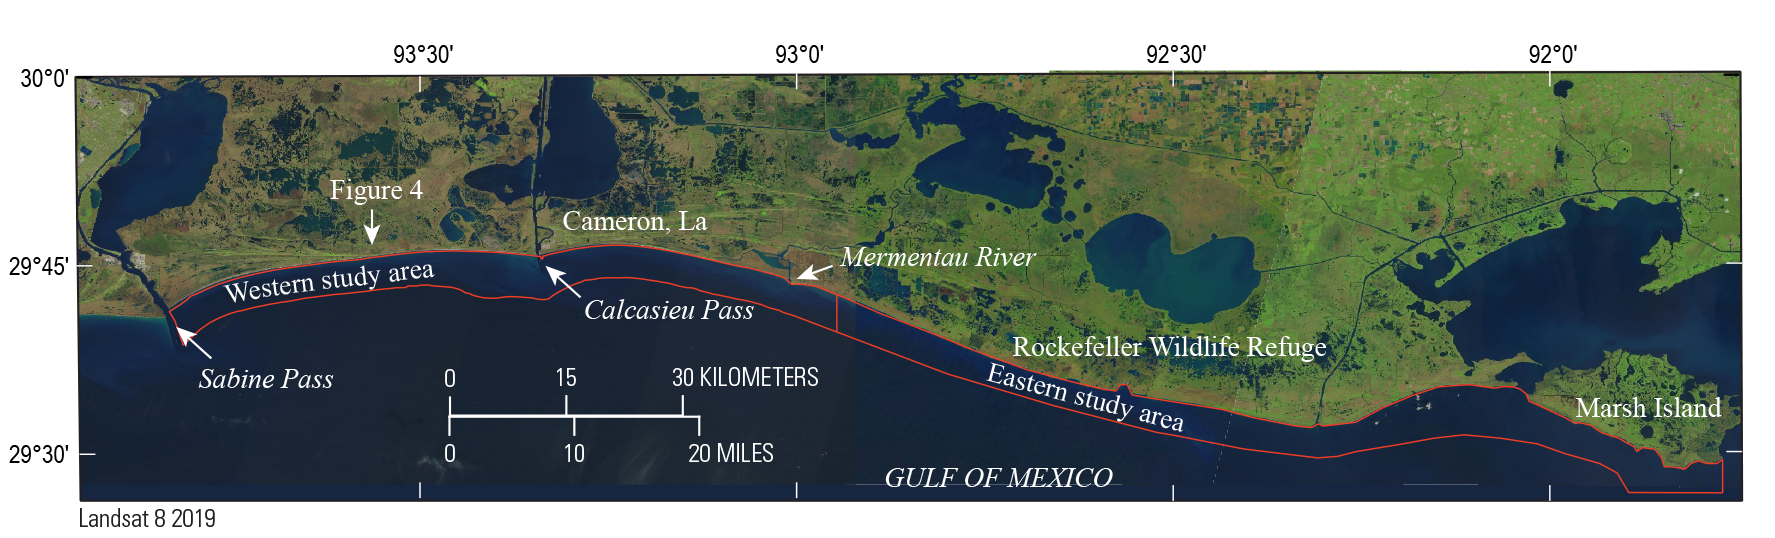 Figure 1. Arrows point to, from west to east respectively, Sabine Pass, location of
                     figure 4, Calcasieu Pass, and Marmentau River.